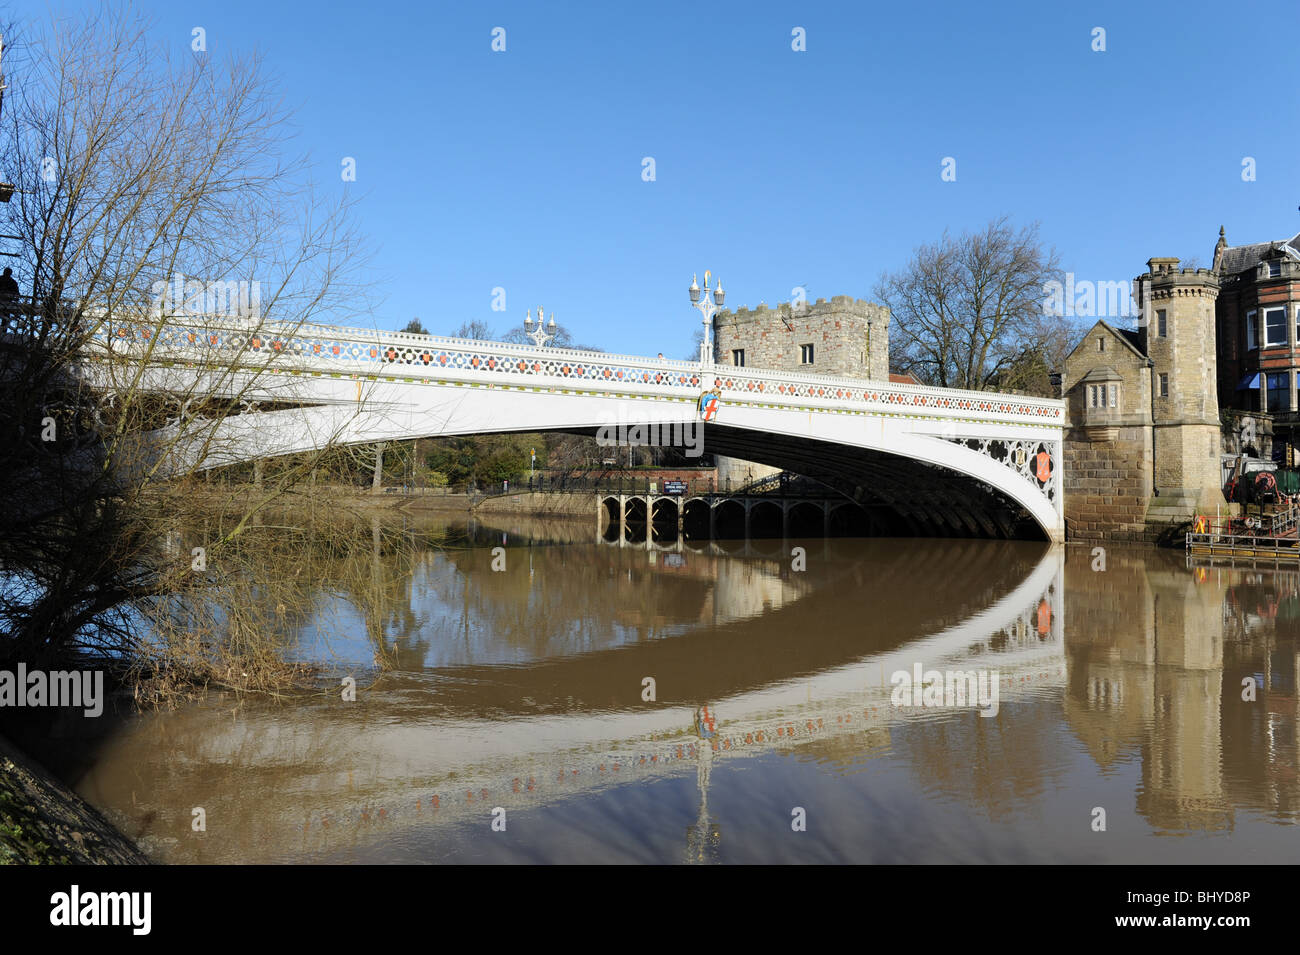 Lendal Bridge over the River Ouse City of York in North Yorkshire England Uk Stock Photo